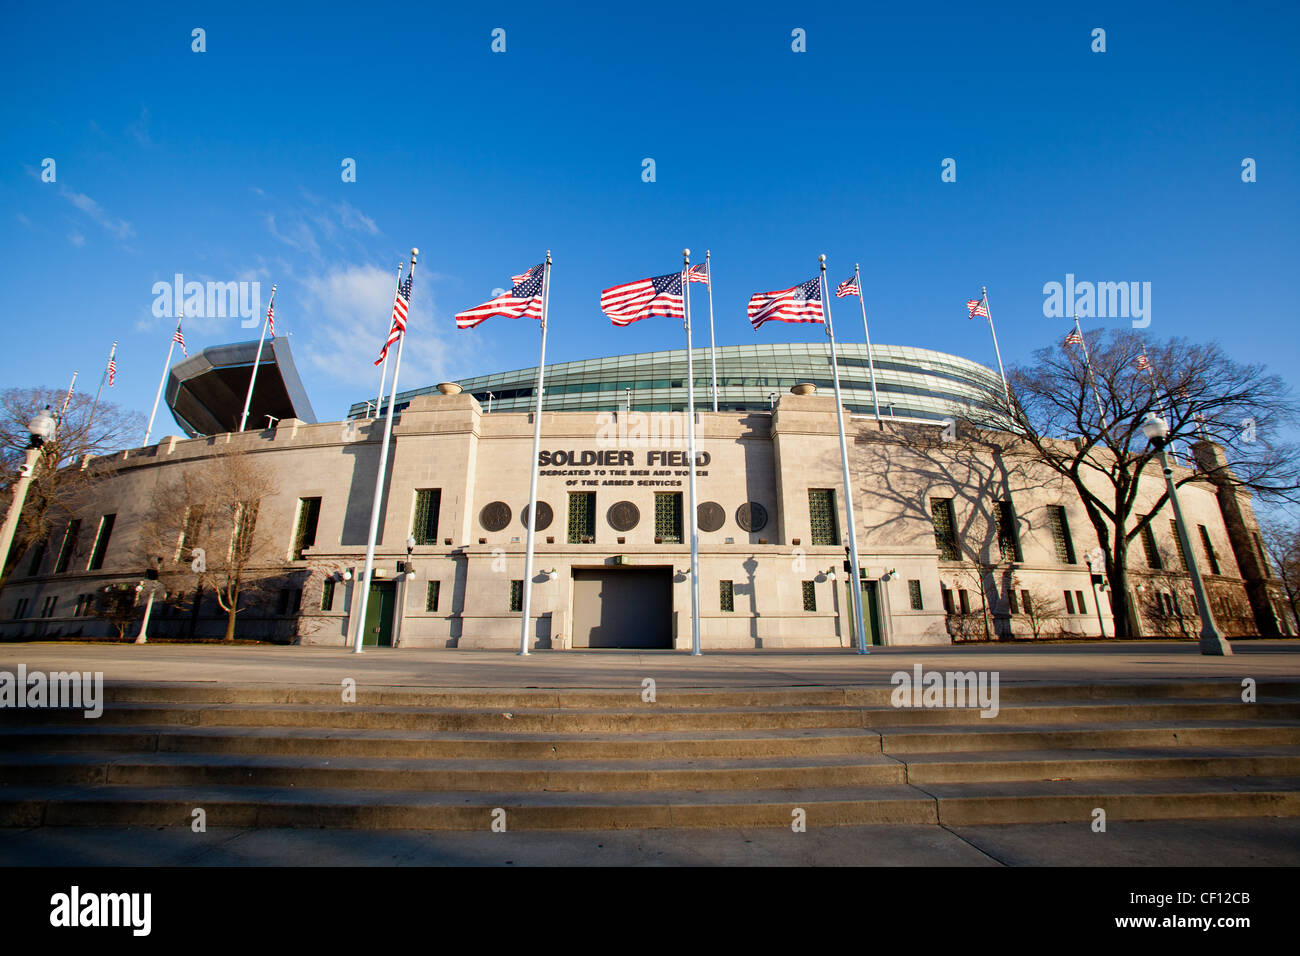 Photos Of Field At Soldier Field Are Going Viral This Afternoon - The Spun:  What's Trending In The Sports World Today